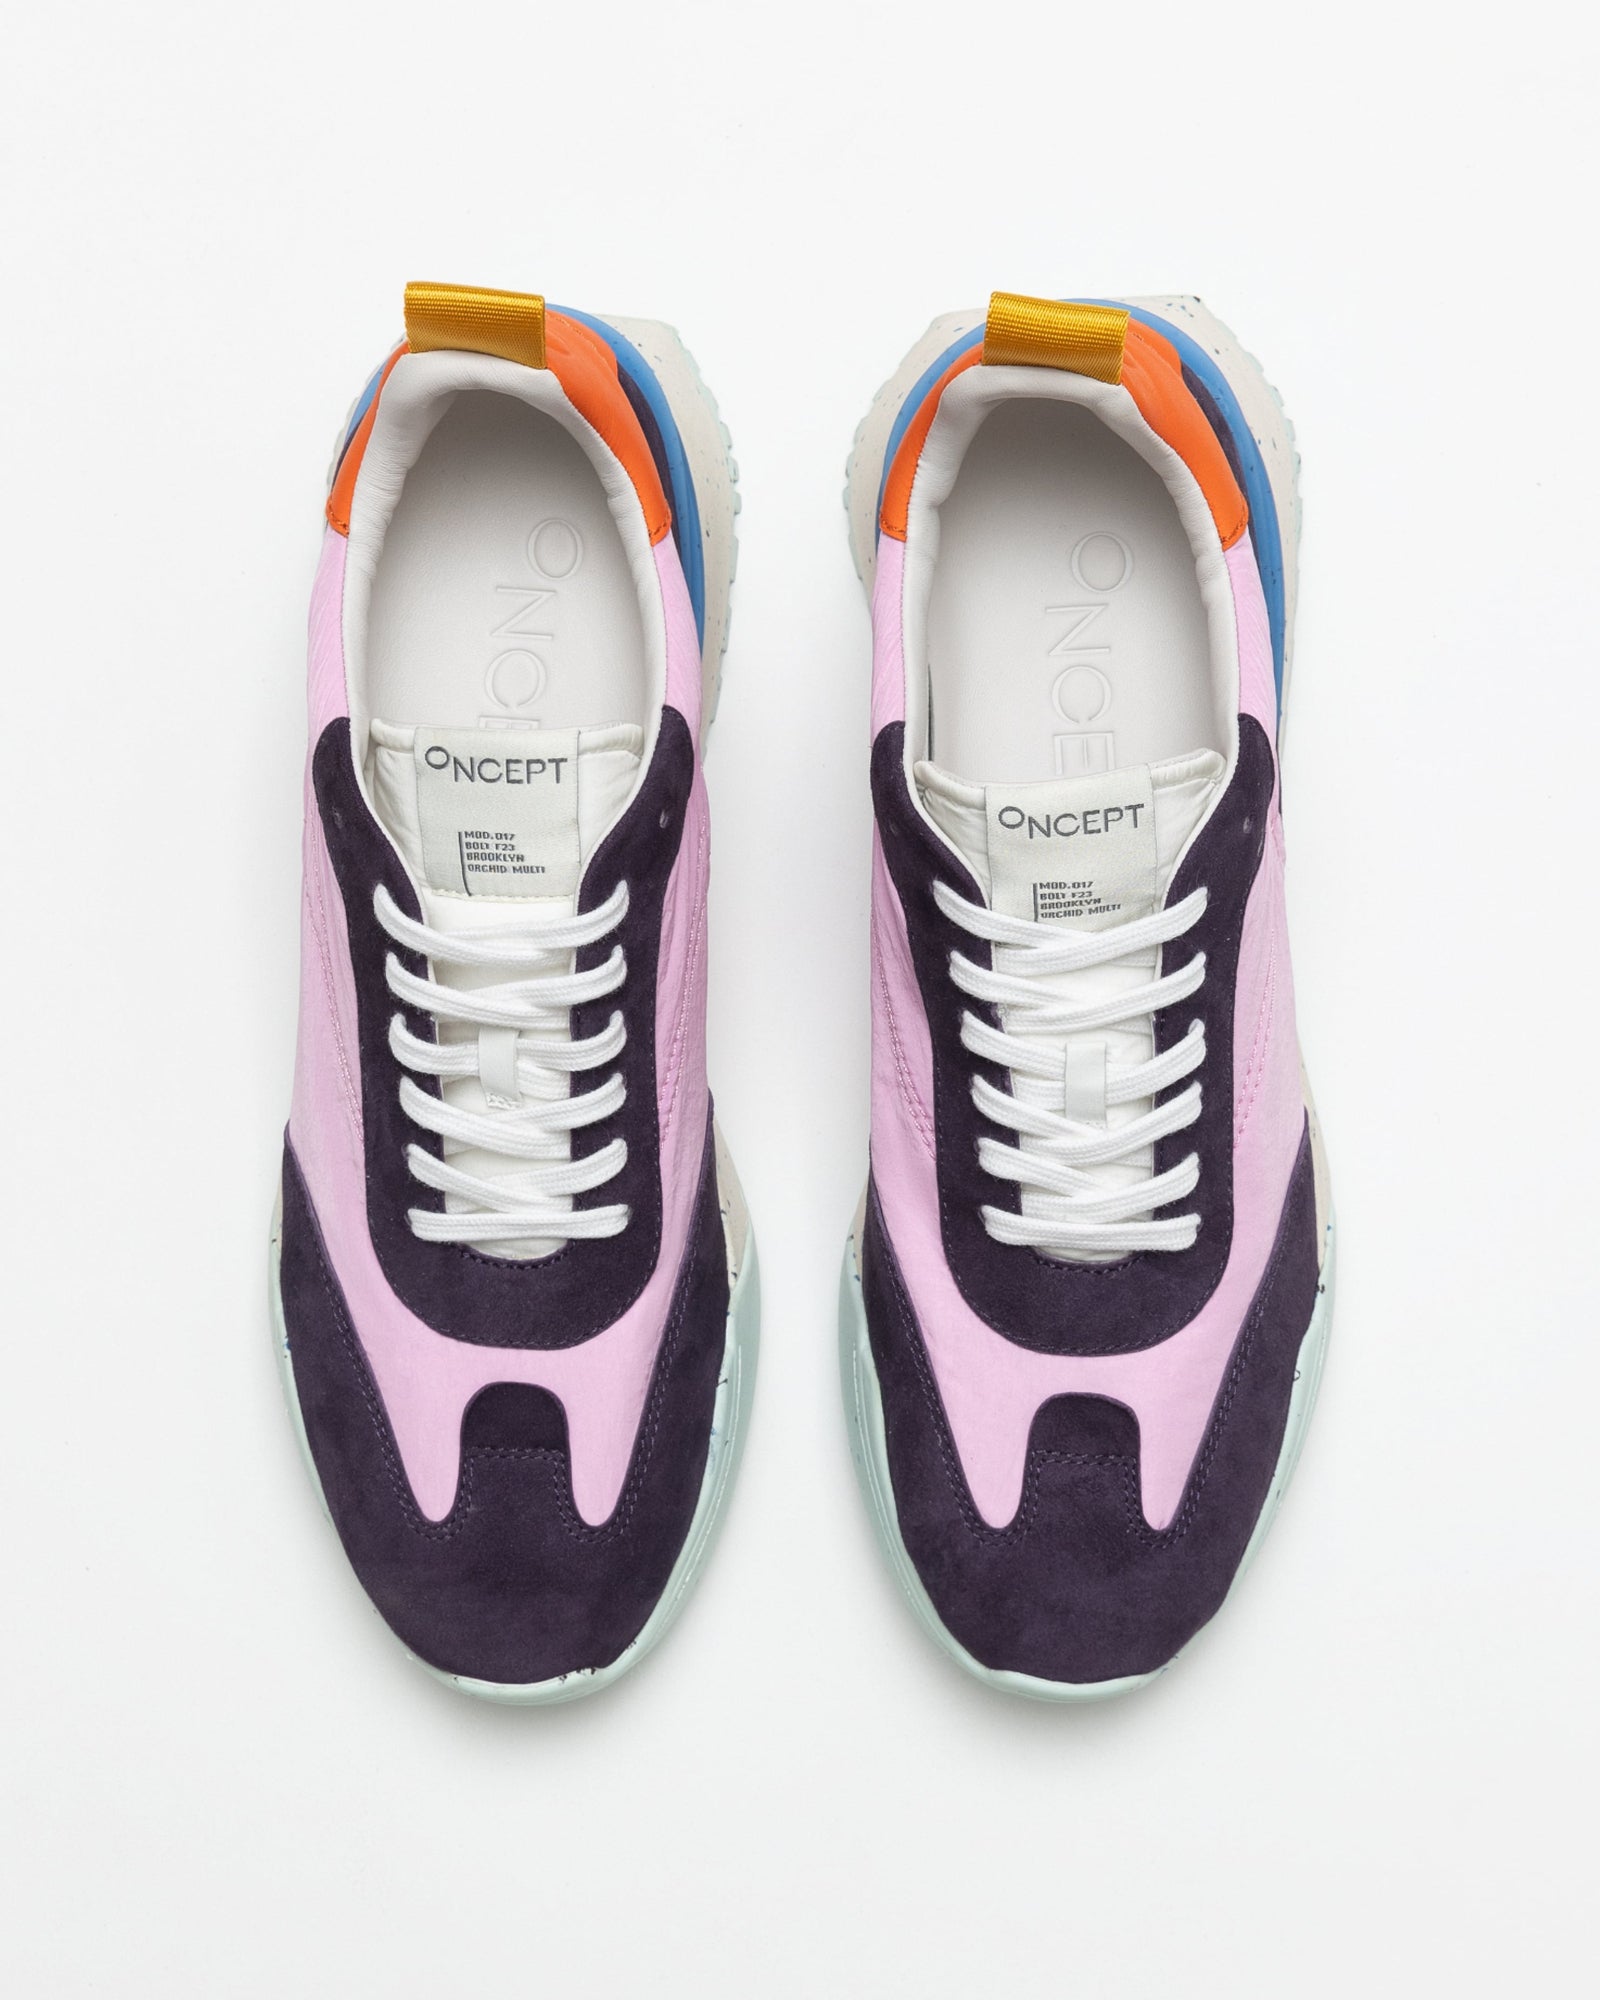 ONCEPT - Brooklyn Sneaker - Orchid Multi - Council Studio